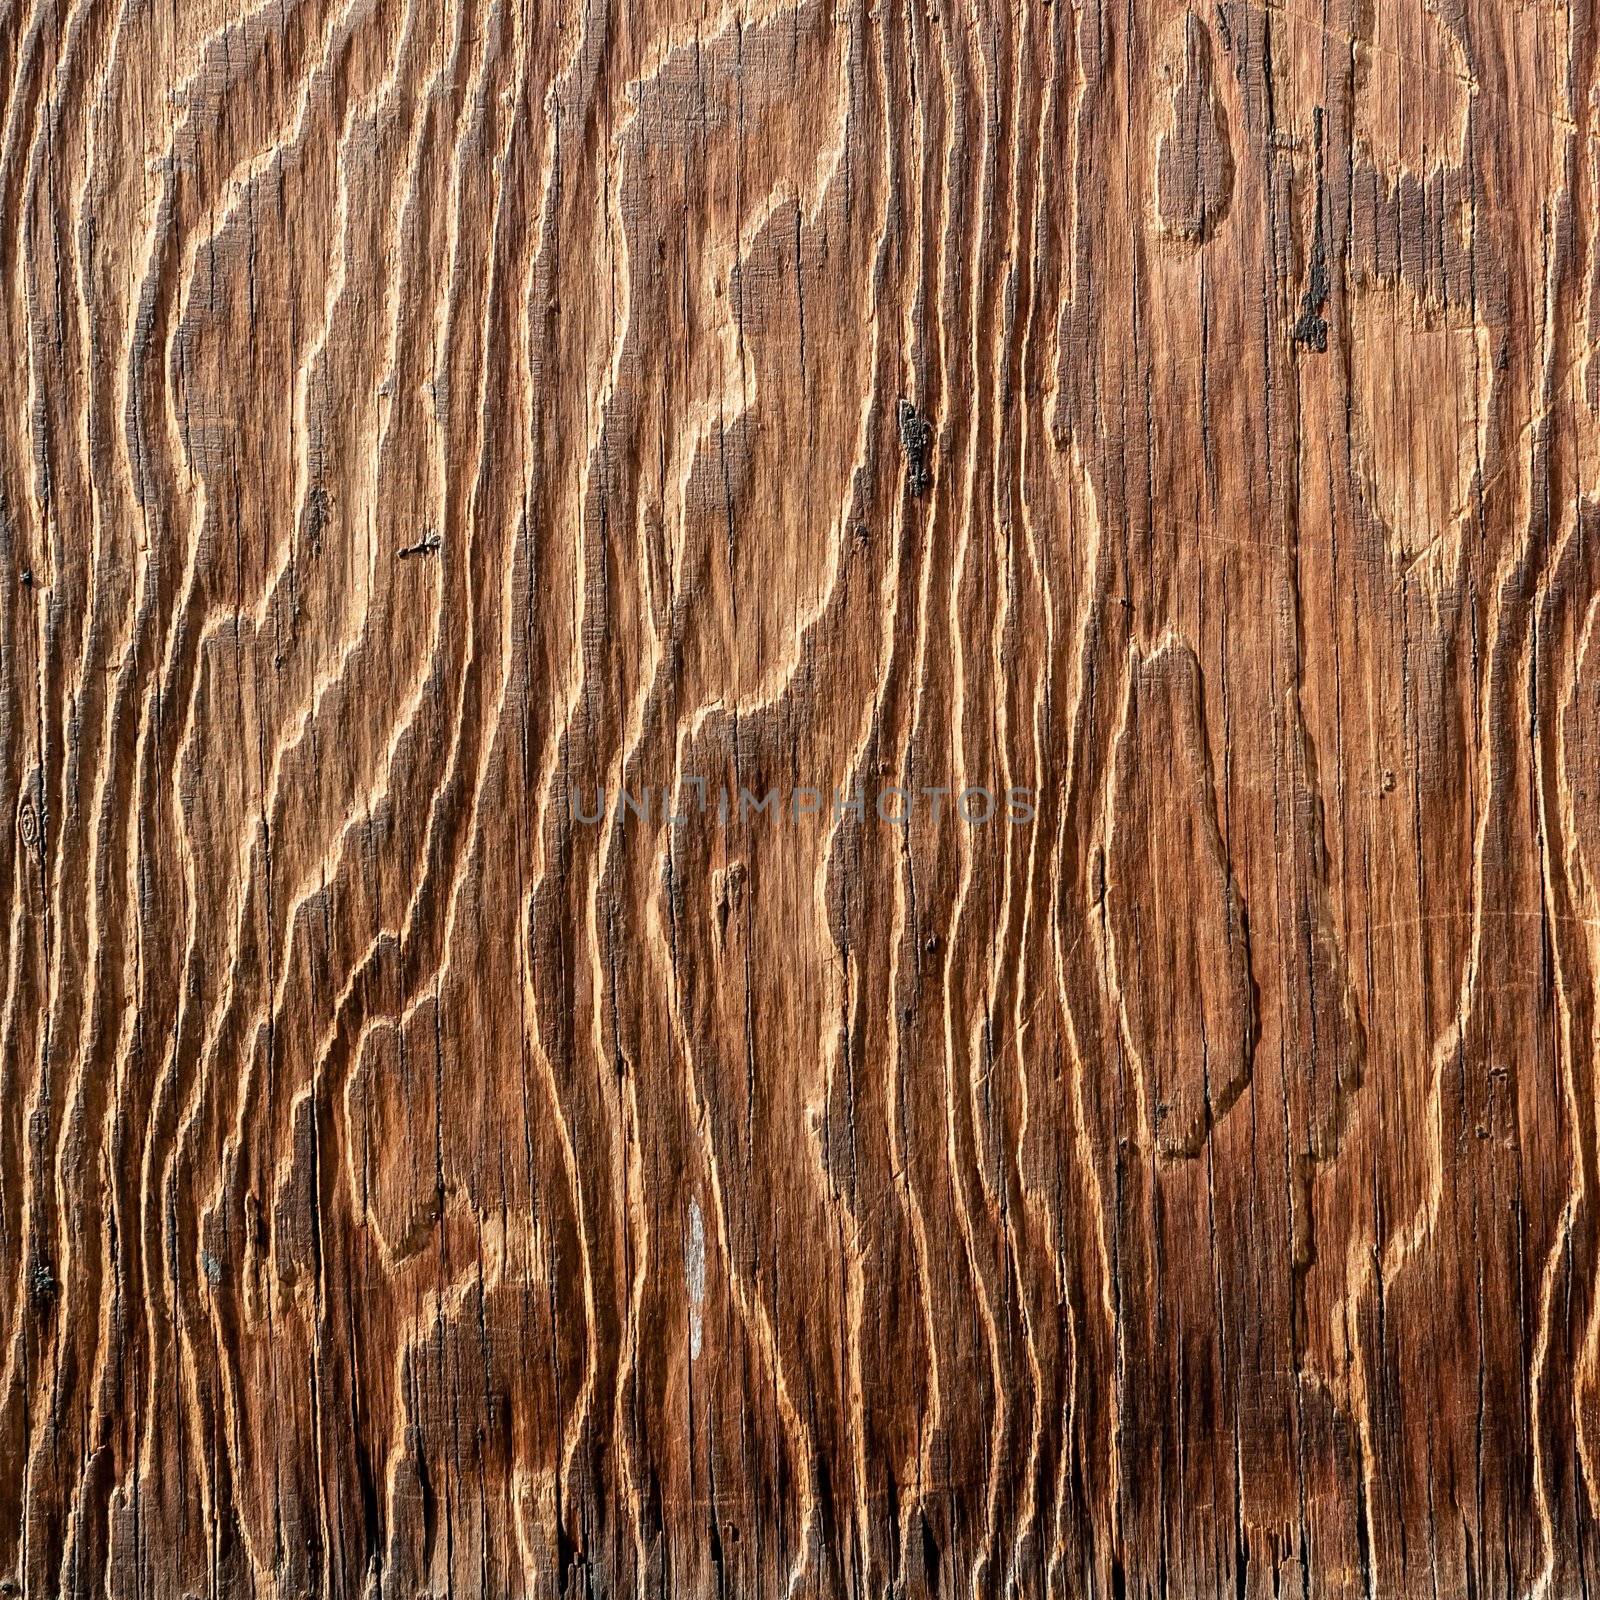 wood material texture artistic pattern